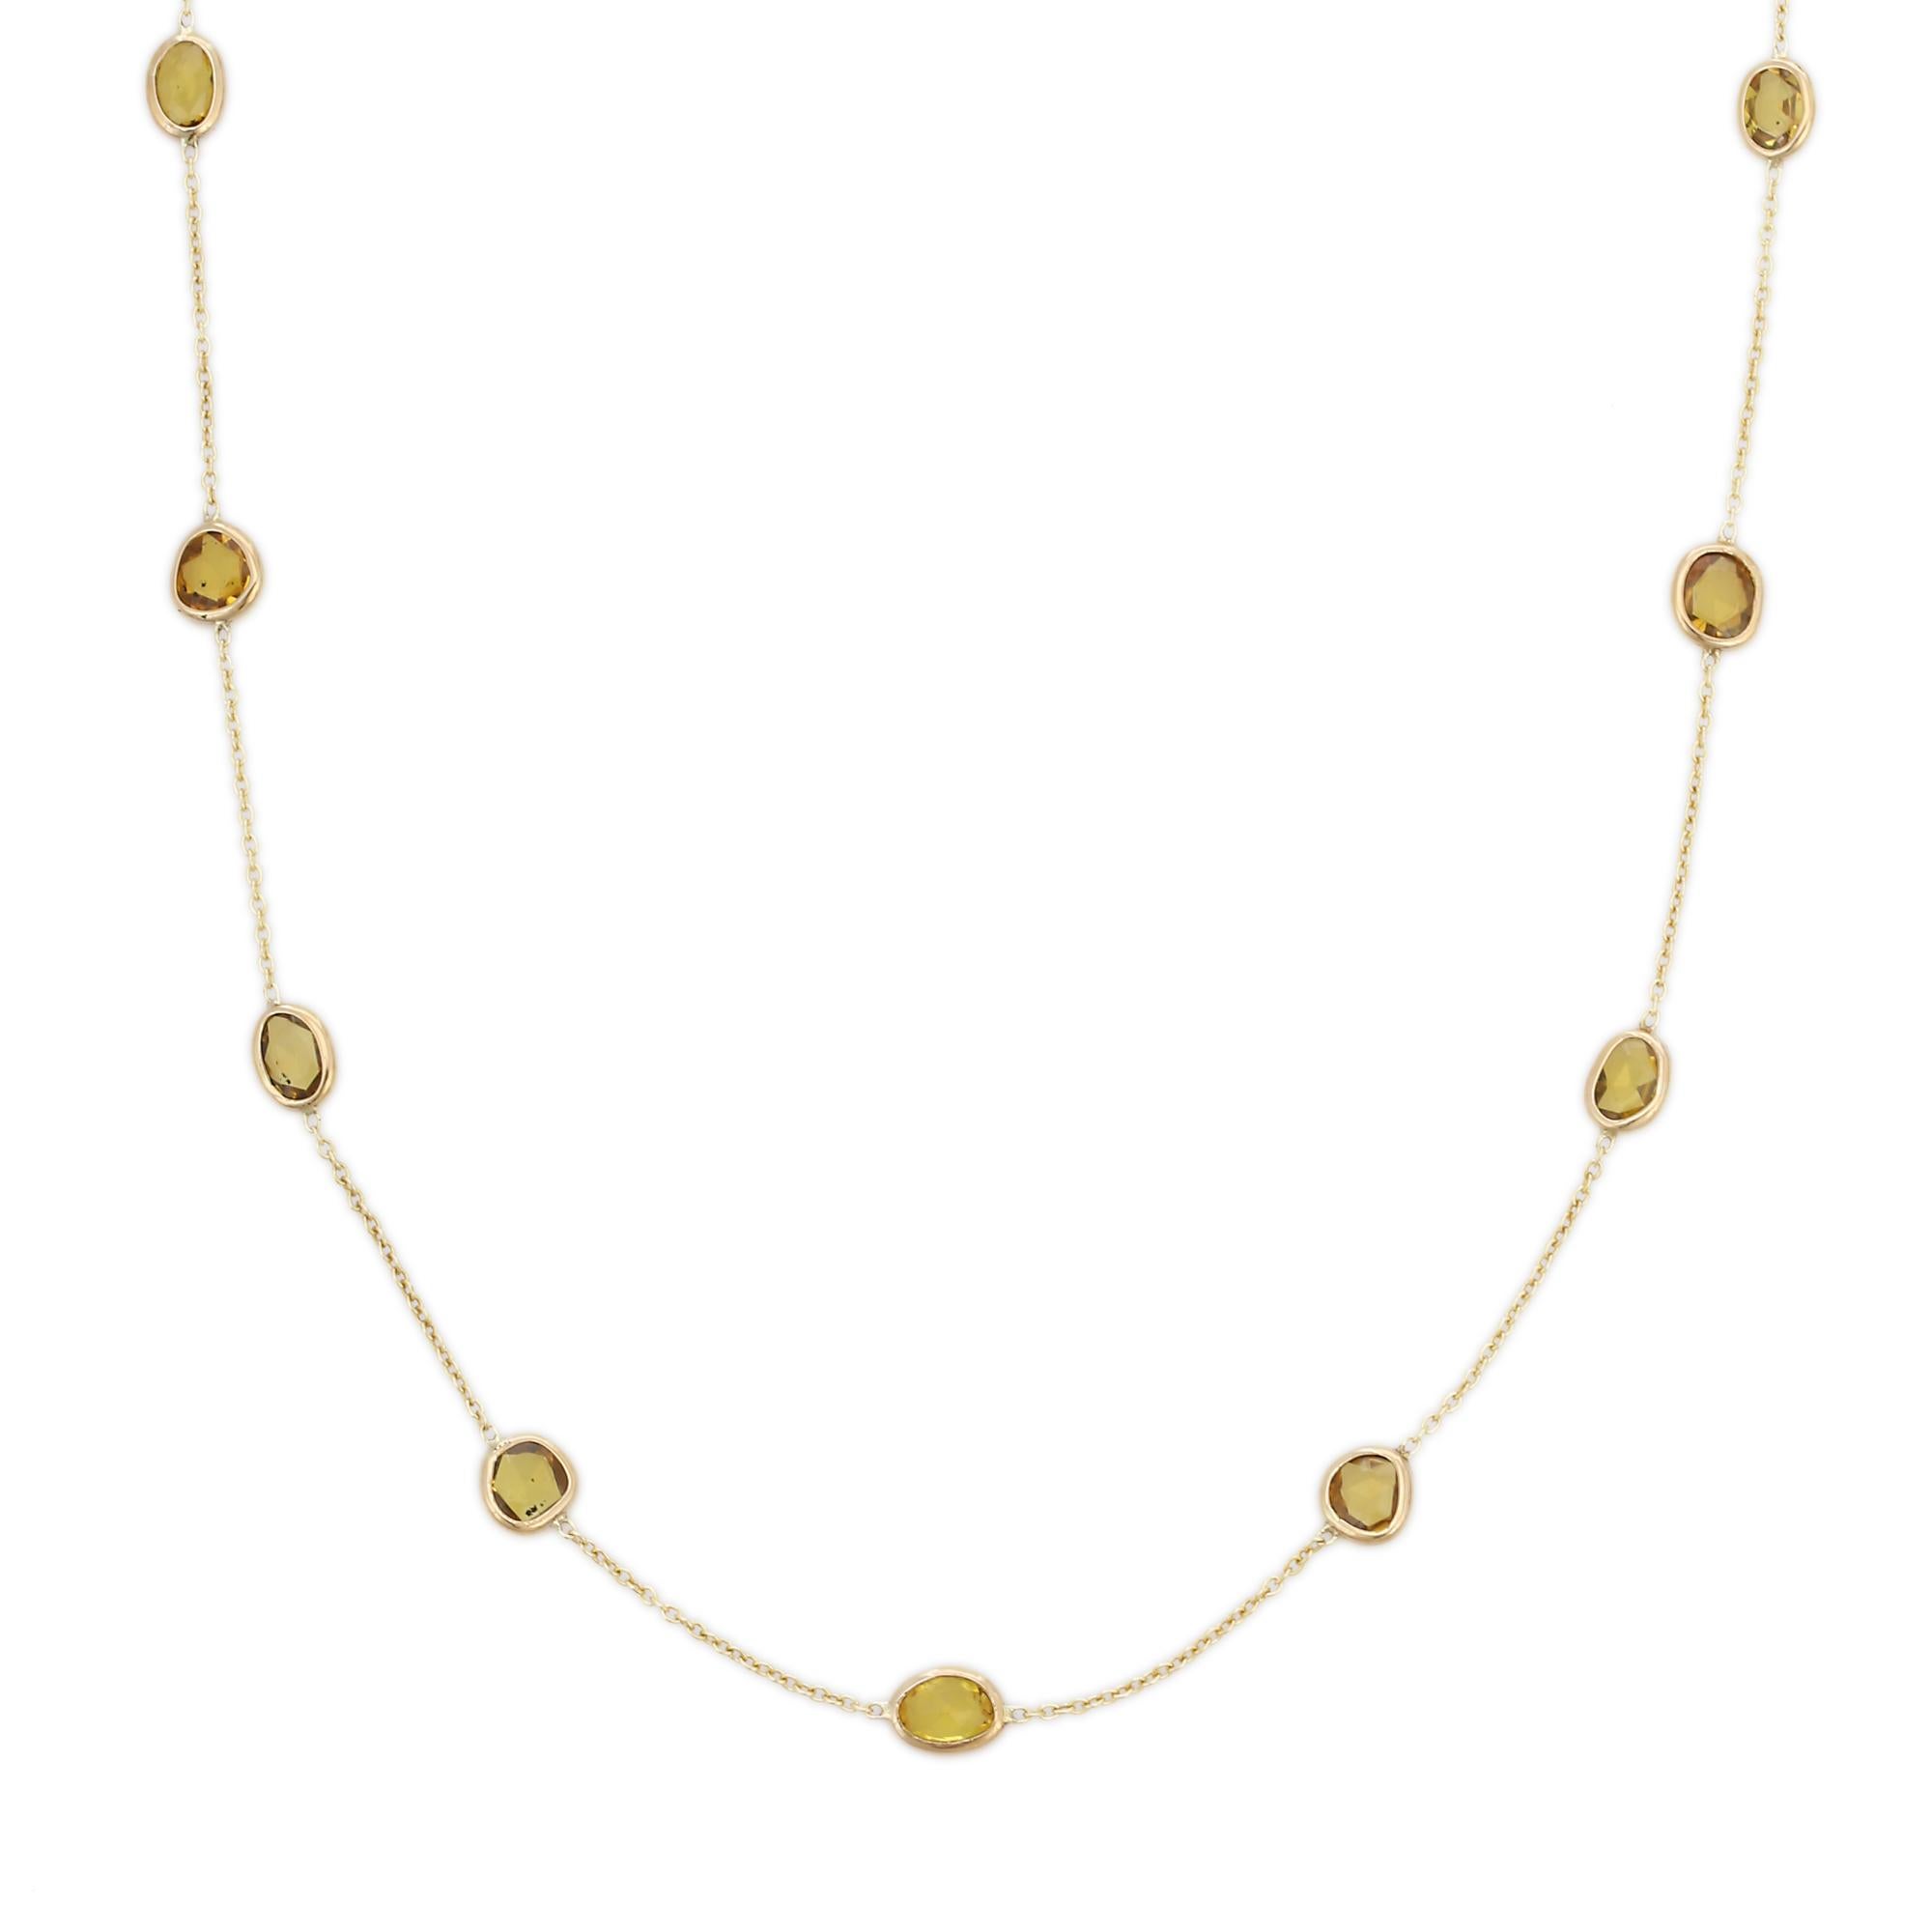 7.65 Ct Yellow Sapphire Station Chain Necklace 14k Yellow Gold, Grandma Gift In New Condition For Sale In Houston, TX